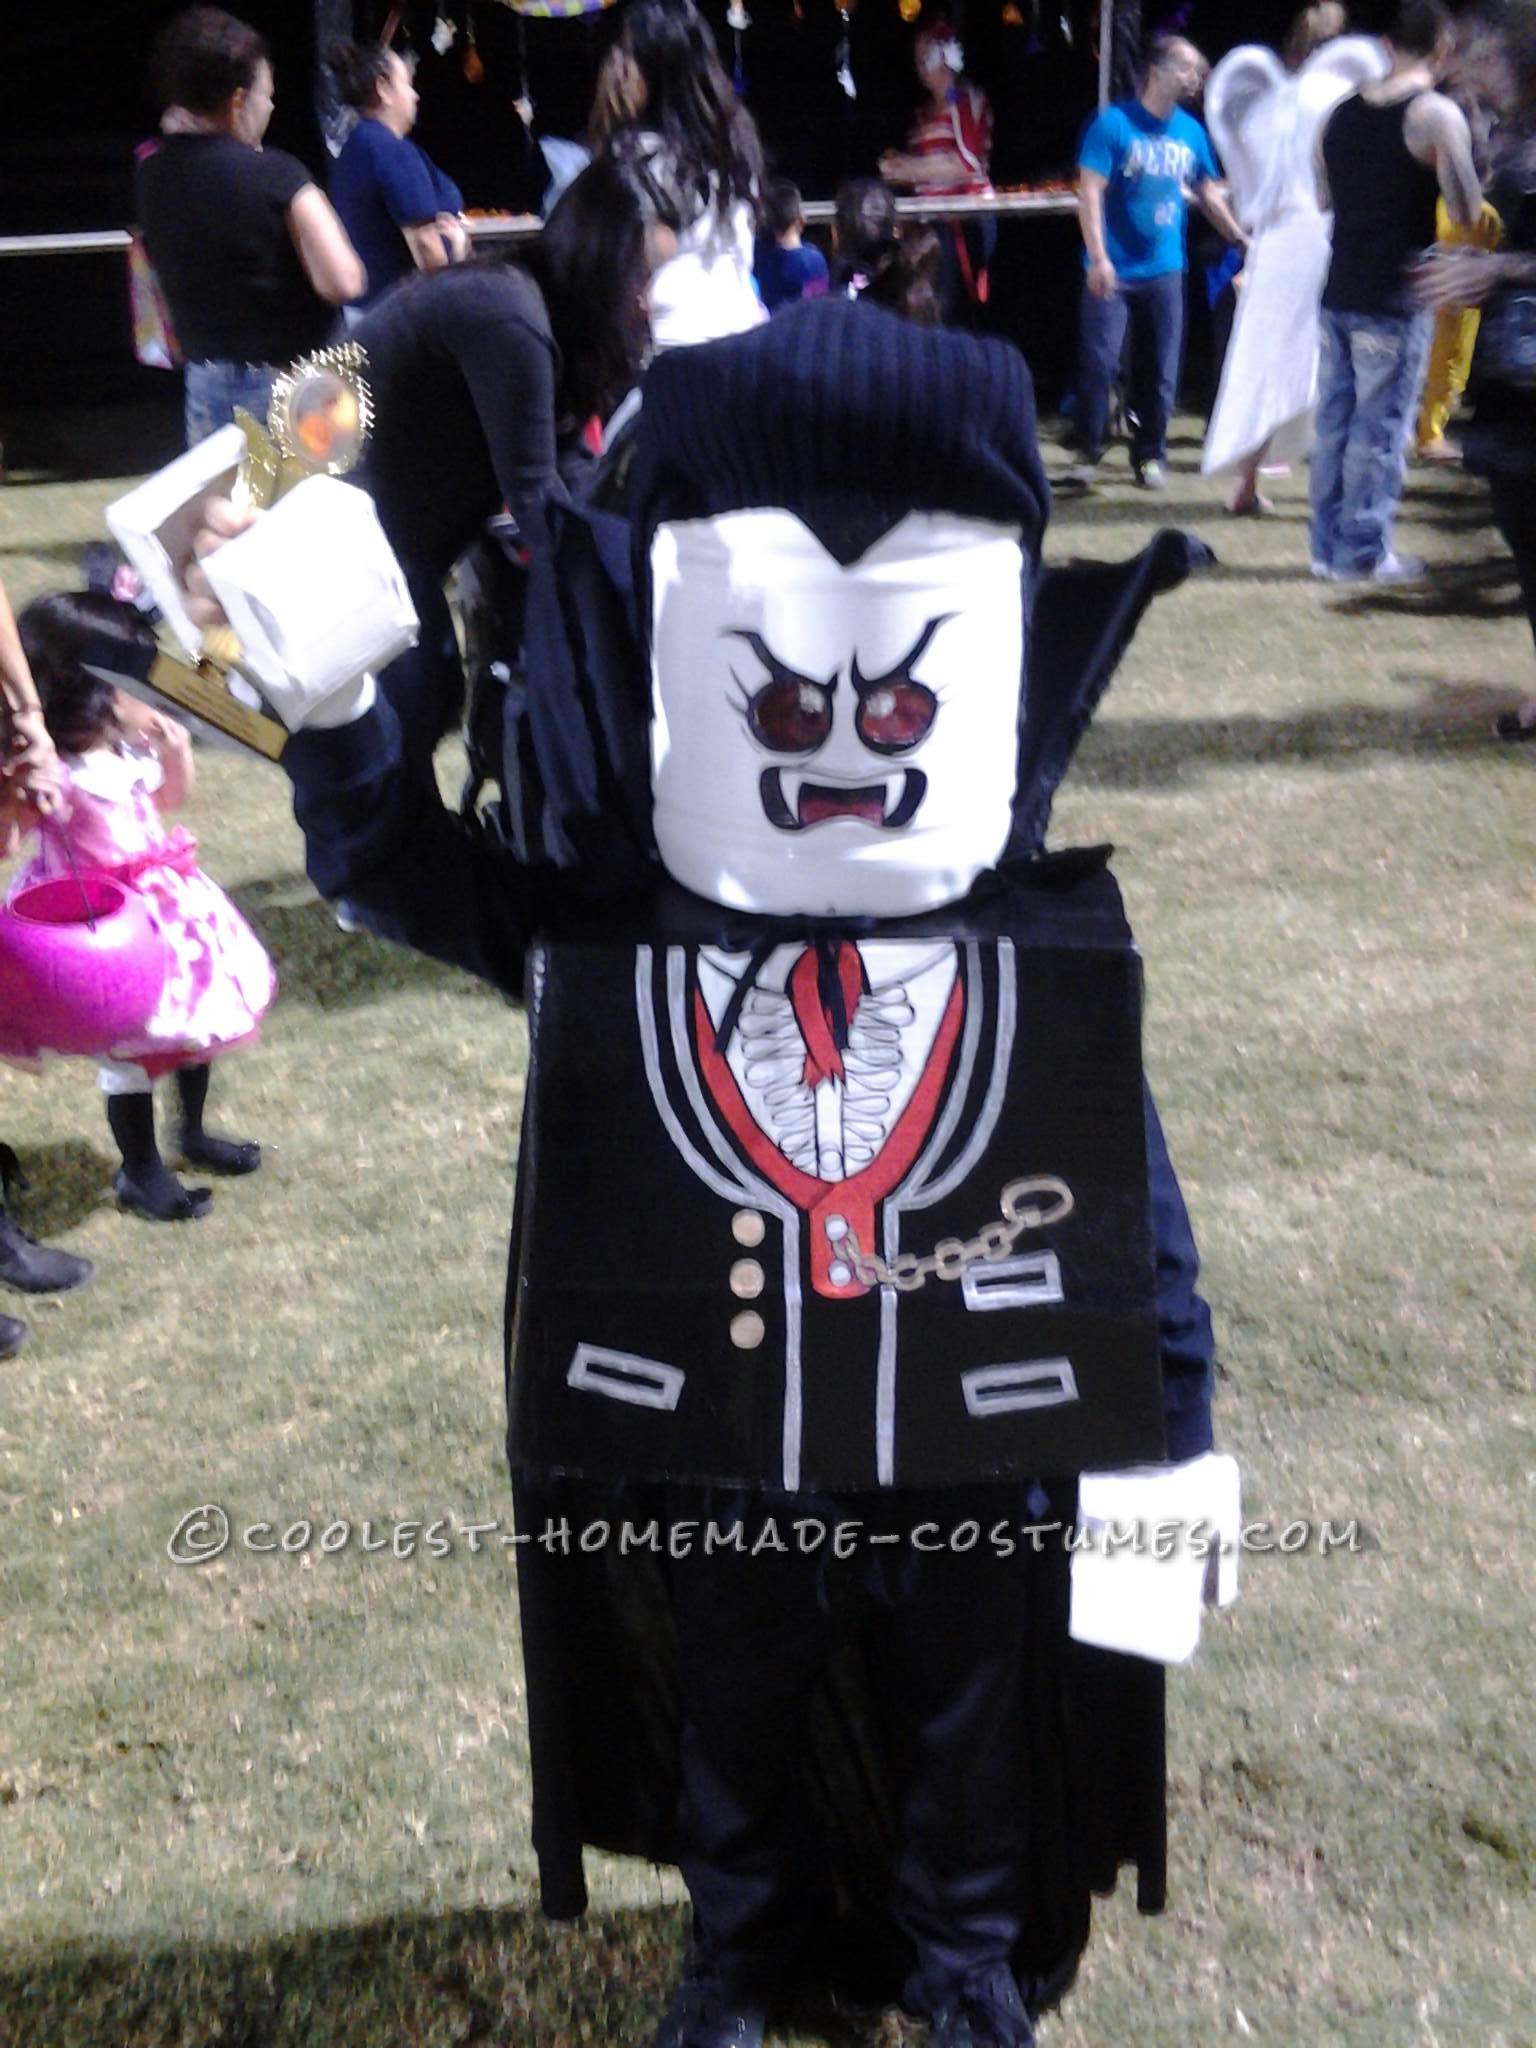 Our Version of Lego Lord Vampire Costume